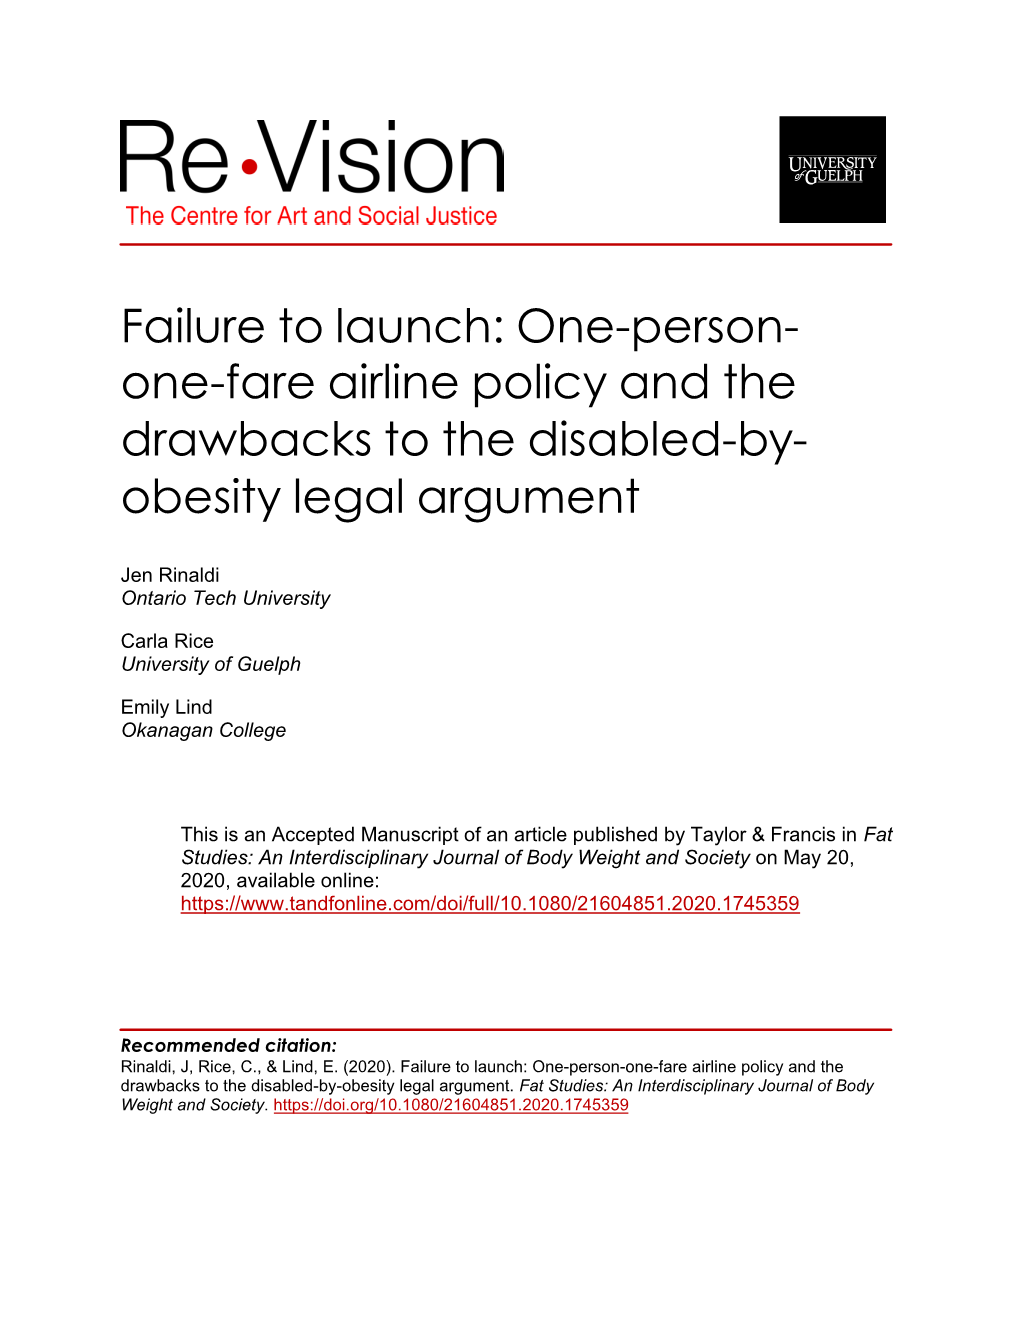 Failure to Launch: One-Person-One-Fare Airline Policy and the Drawbacks to the Disabled-By-Obesity Legal Argument